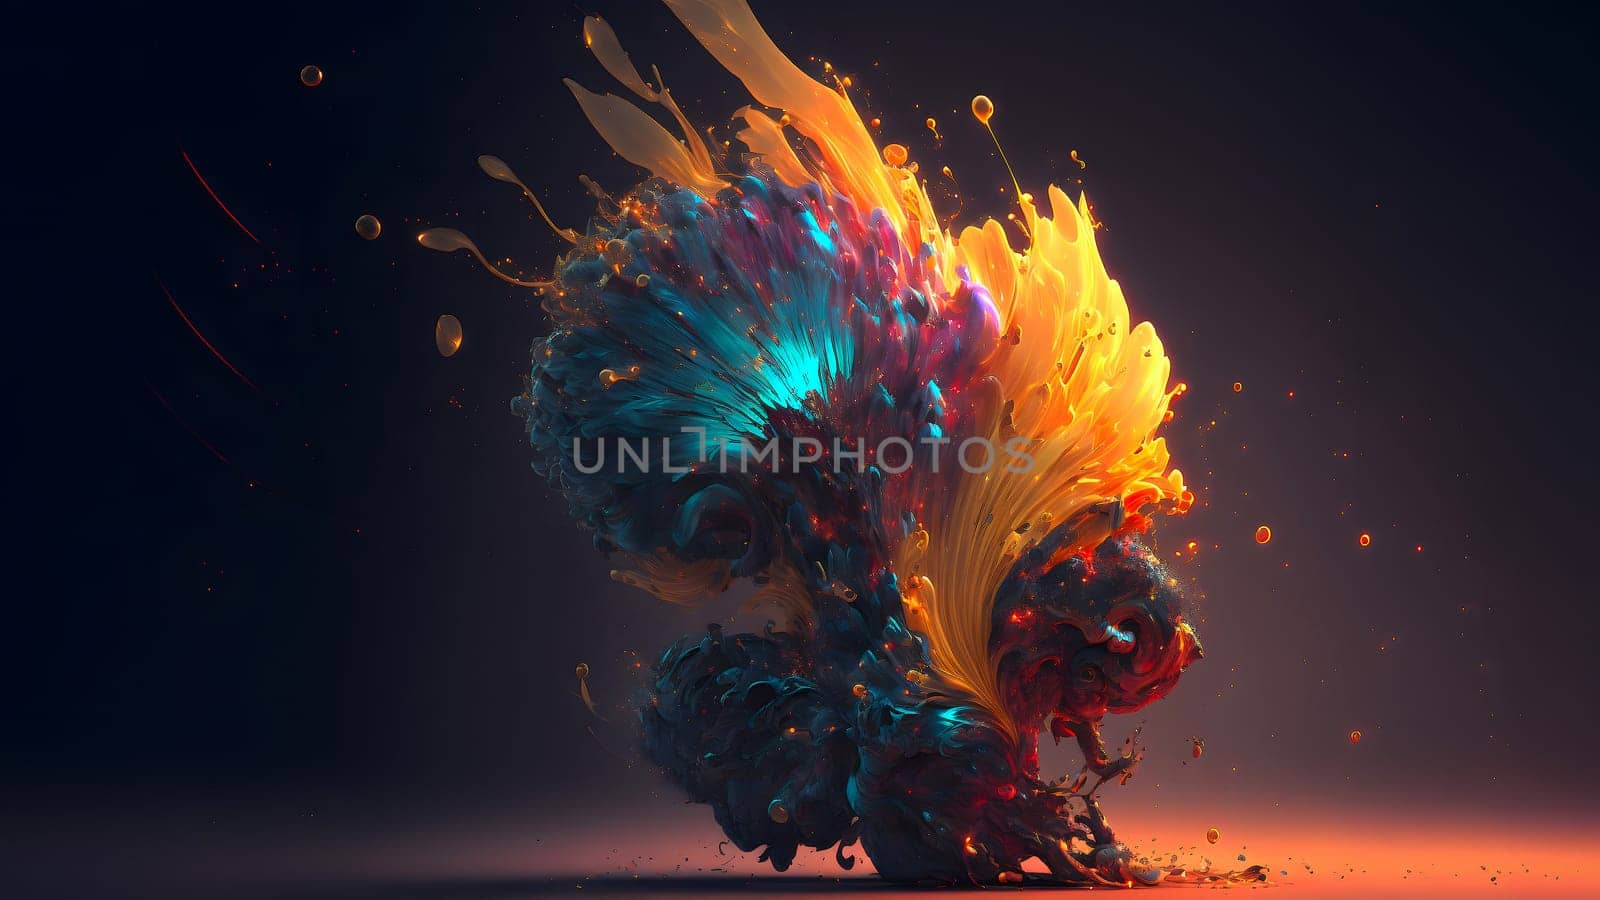 abstract colorful explosion on black background, neural network generated art. Digitally generated image. Not based on any actual person, scene or pattern.